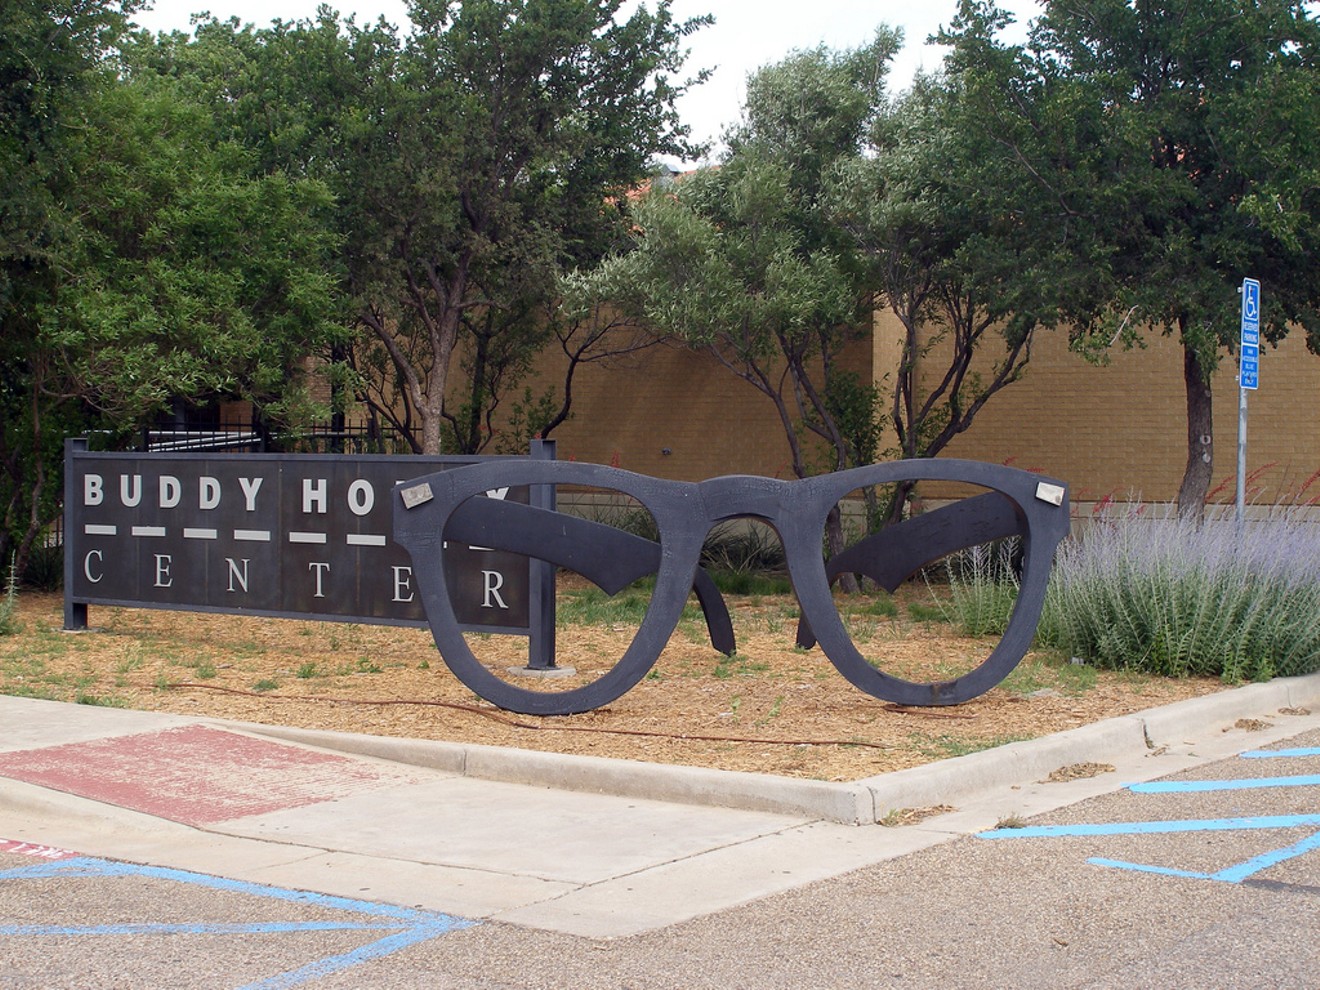 Buddy Holly's iconic glasses outside the Buddy Holly Center in his hometown of Lubbock